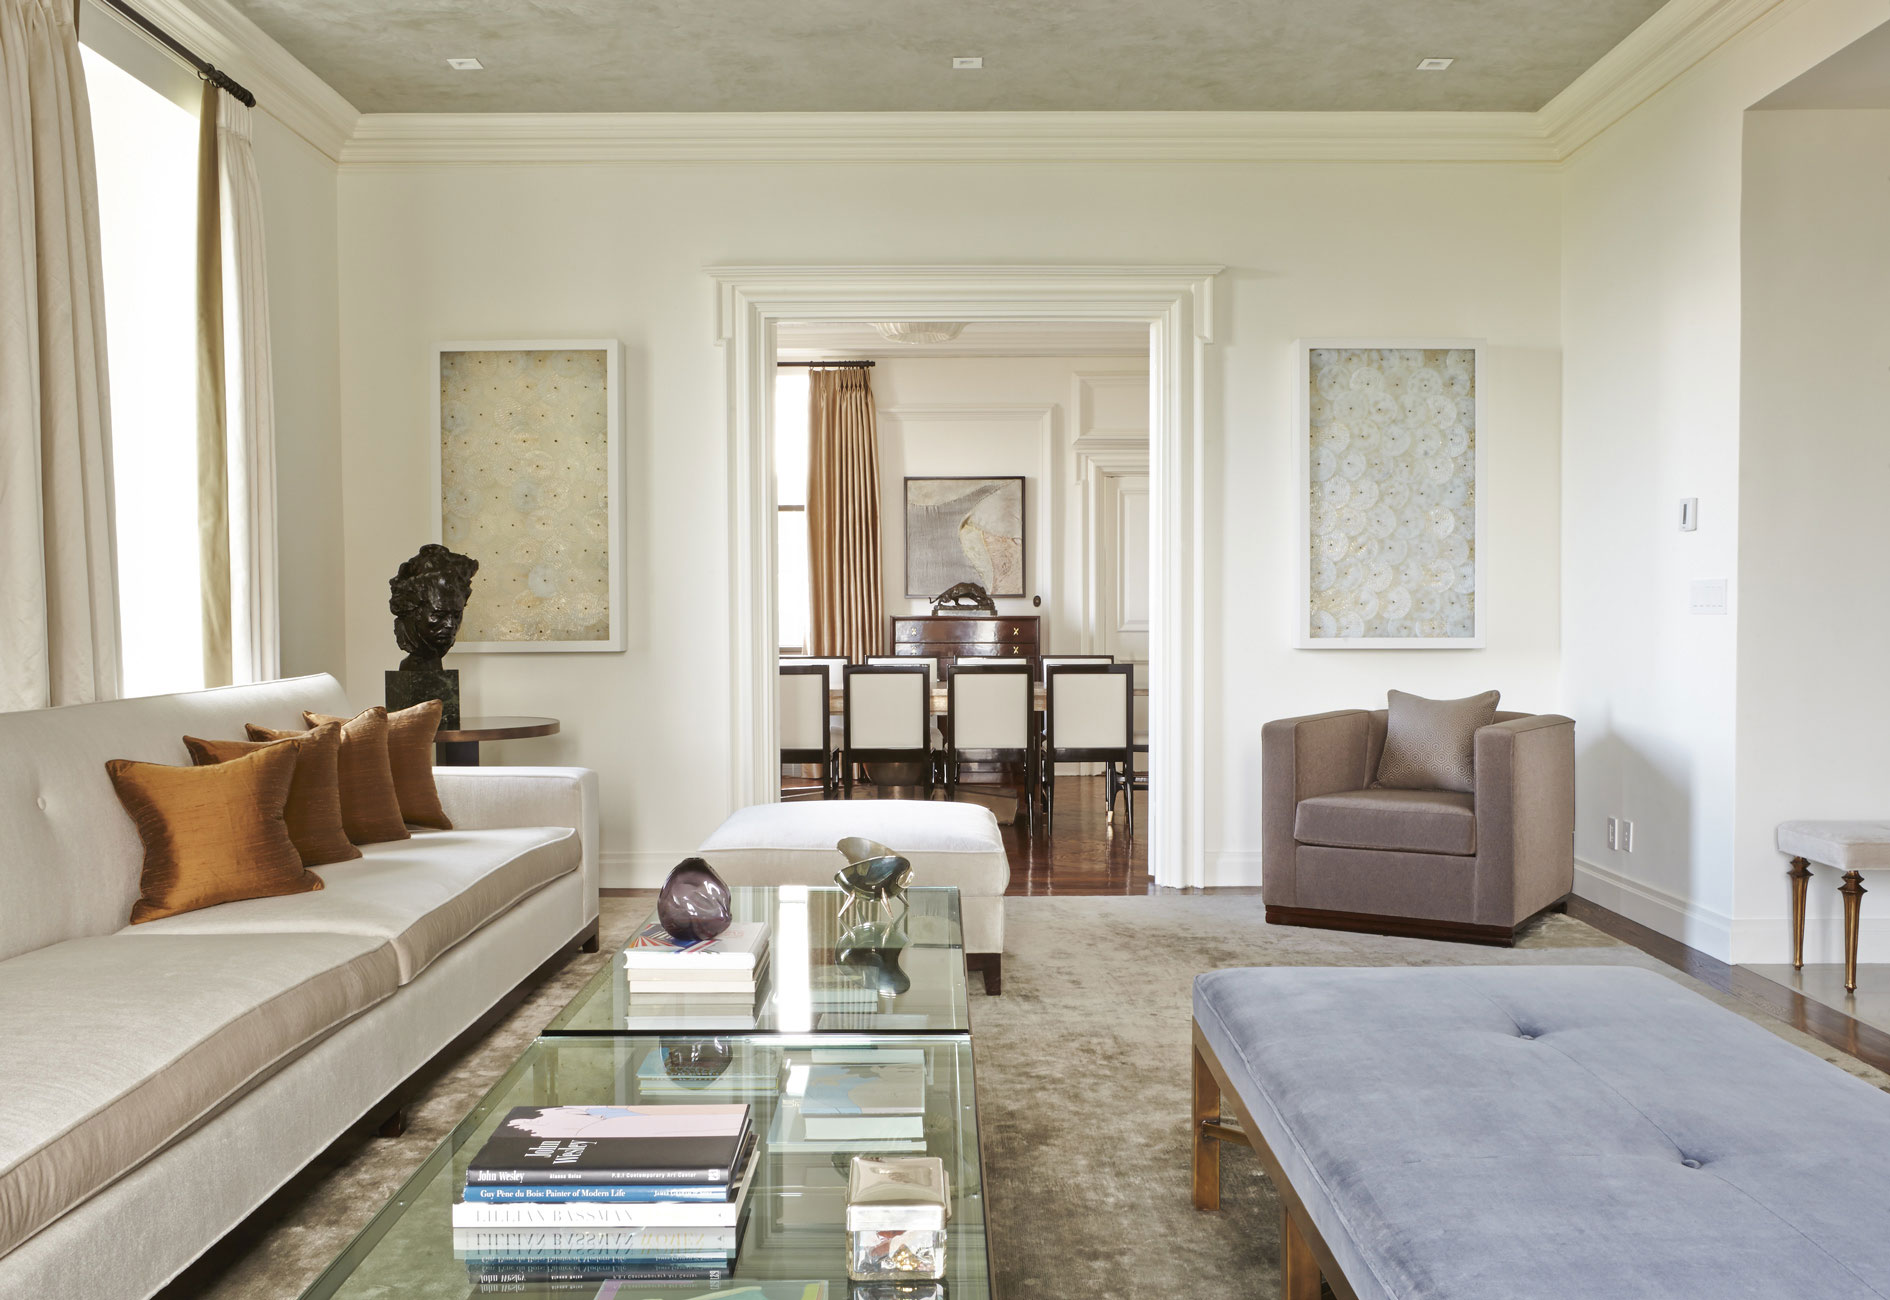 5th Avenue Residence by designed by MARK ZEFF